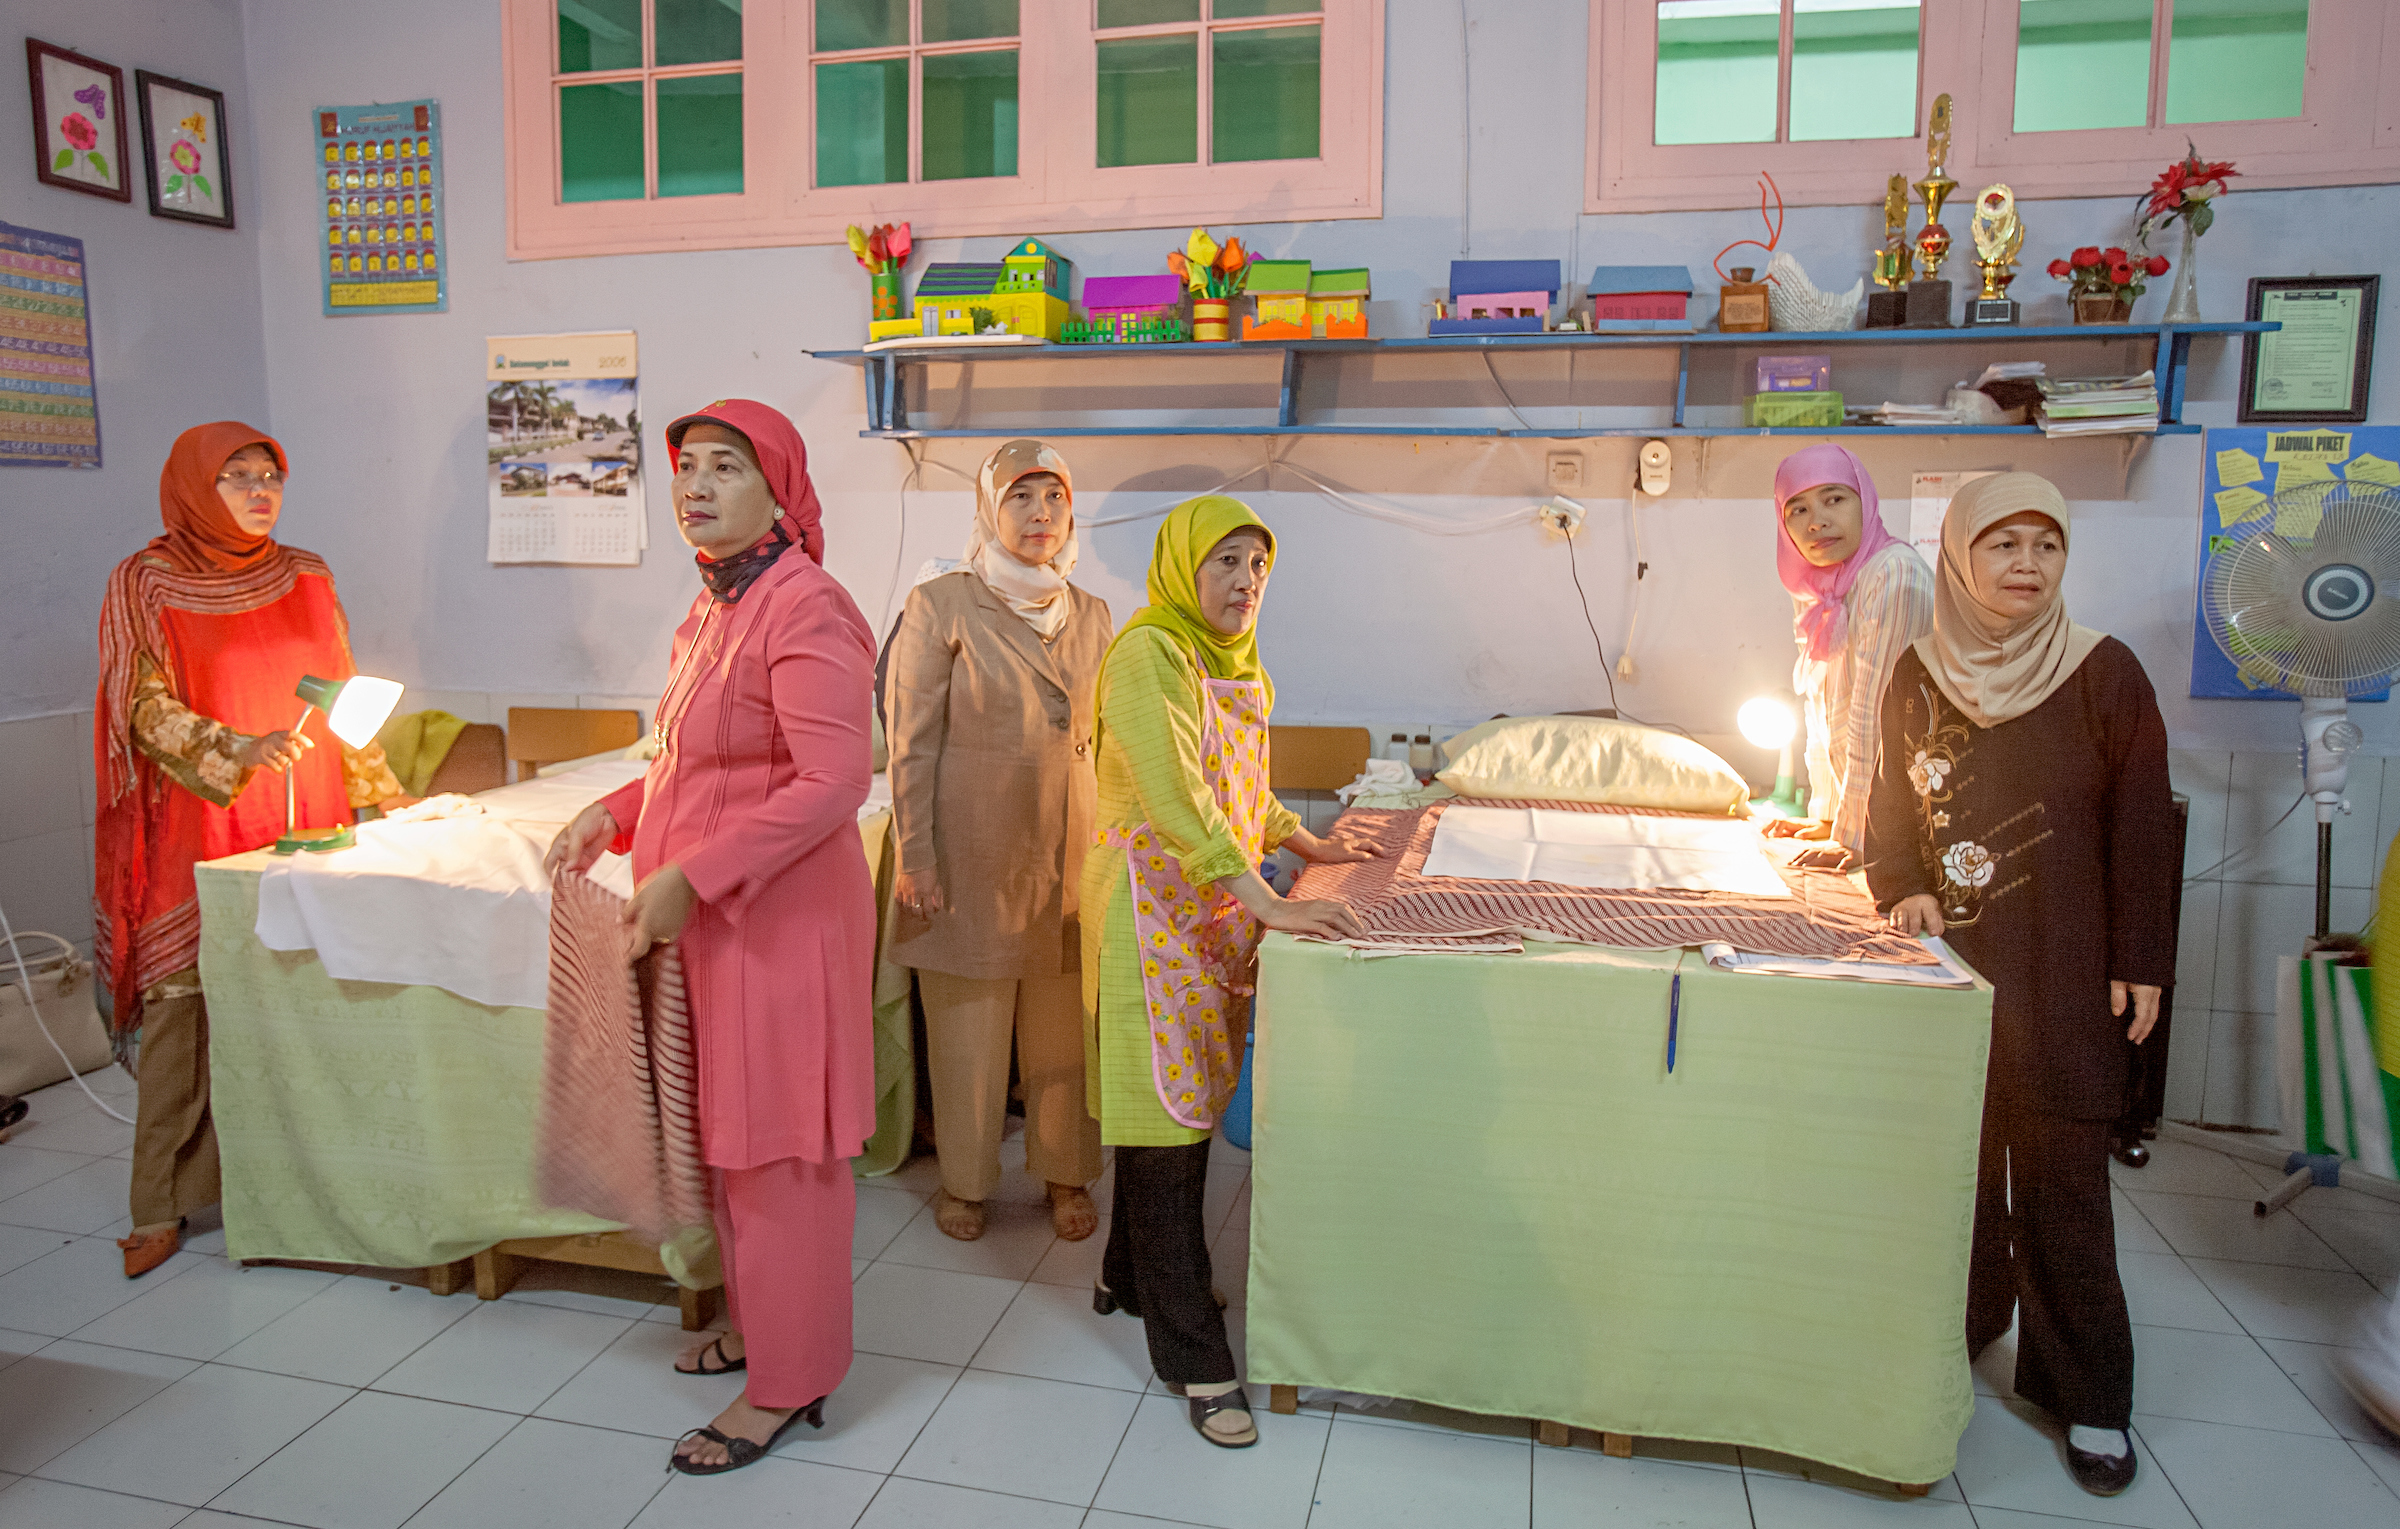 Female circumcisers and their attendants waiting for their next patients in Bandung, Indonesia.